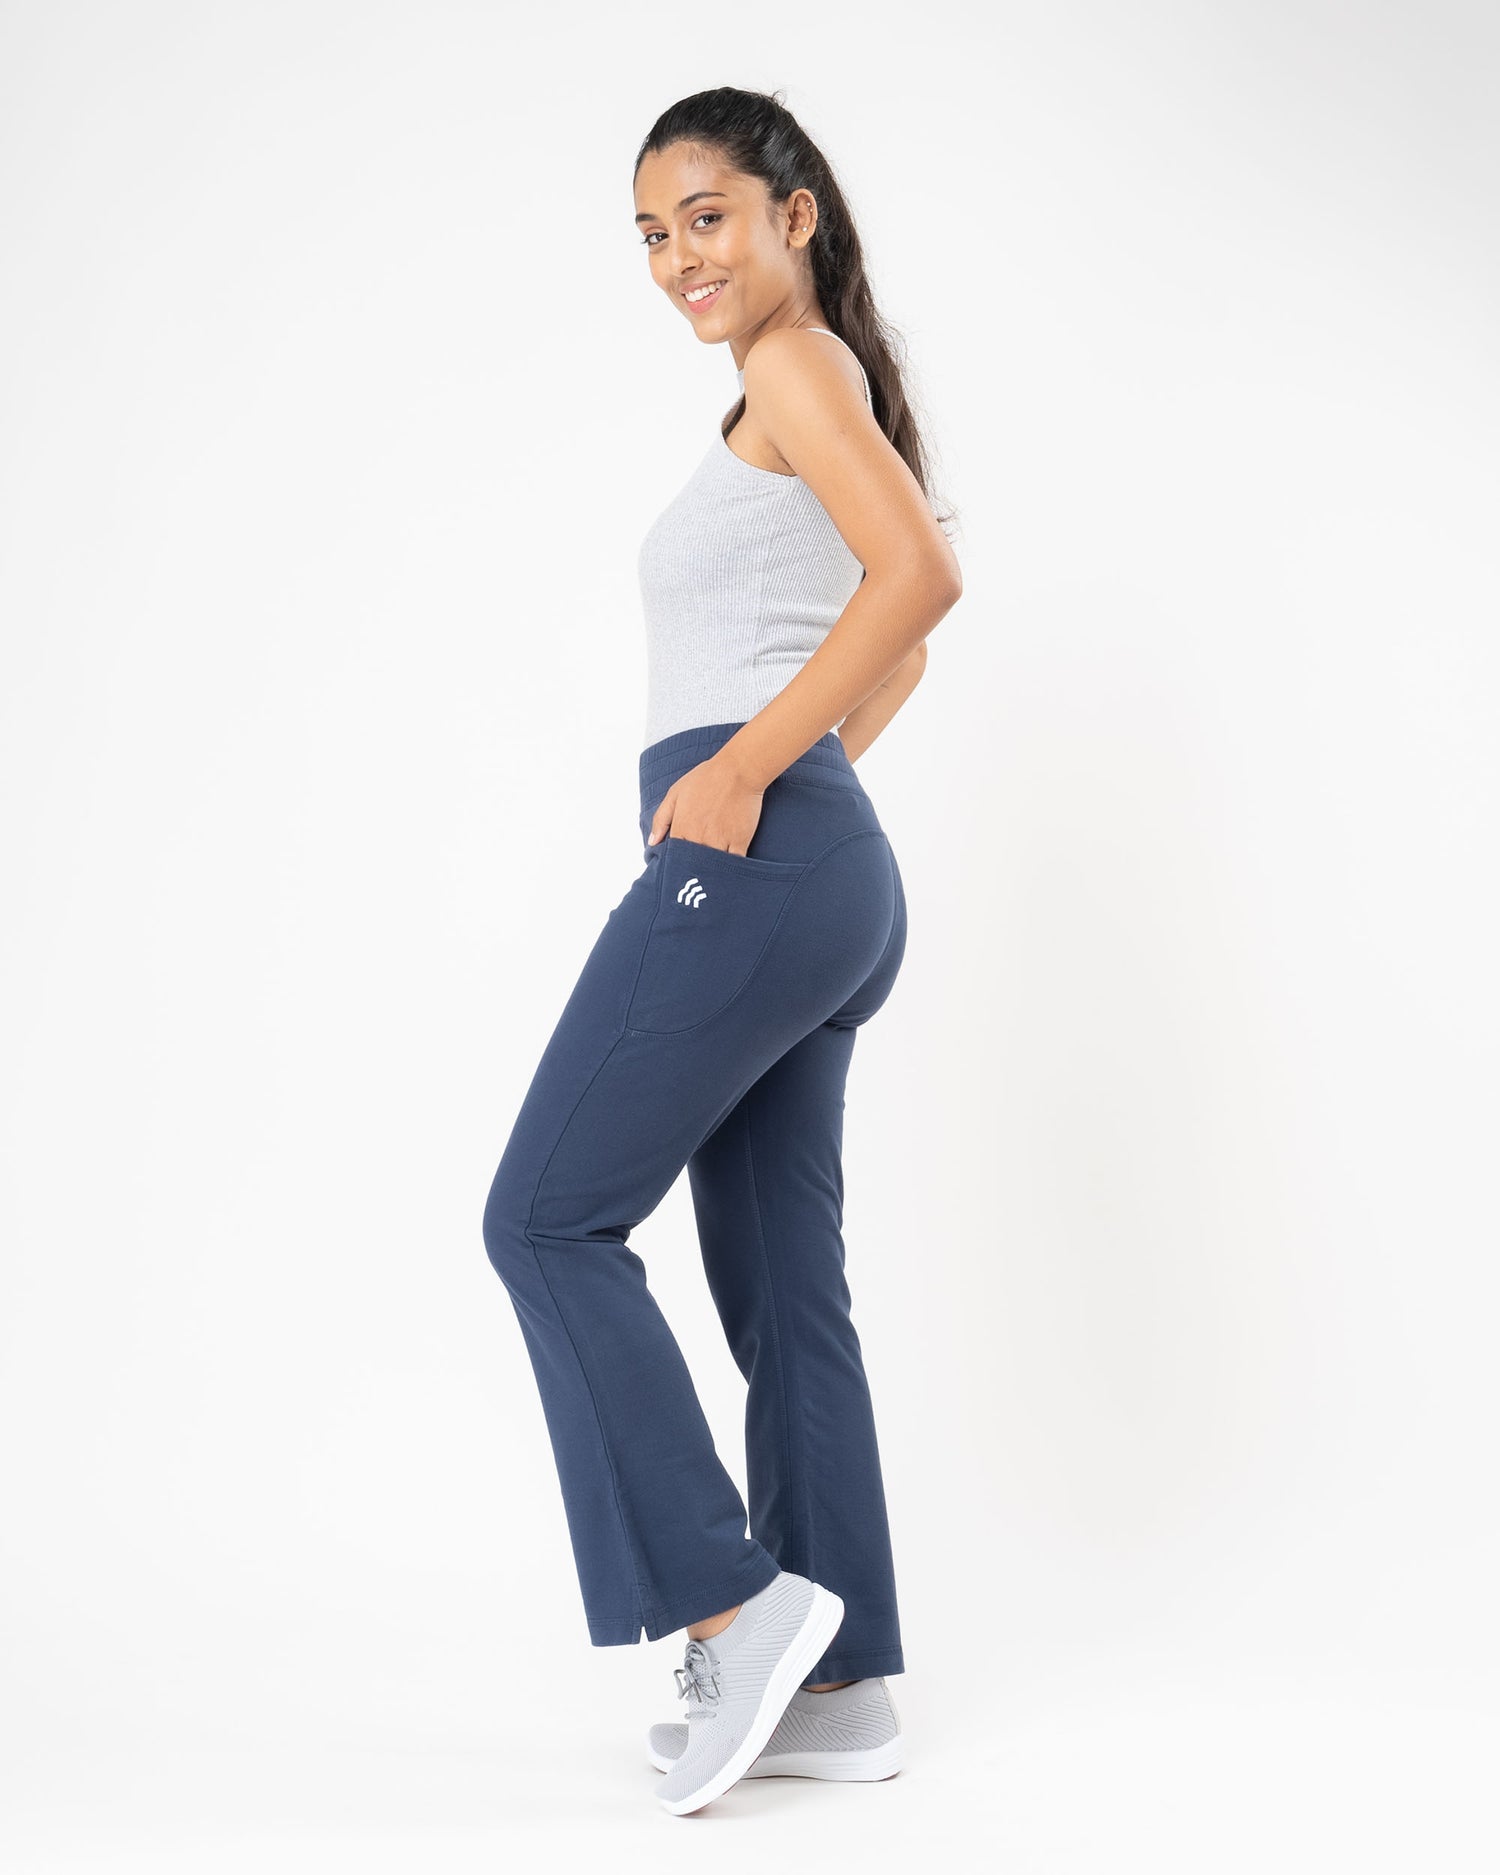 Buy Flared Cotton Summer Pants For Women – Cuttlefish